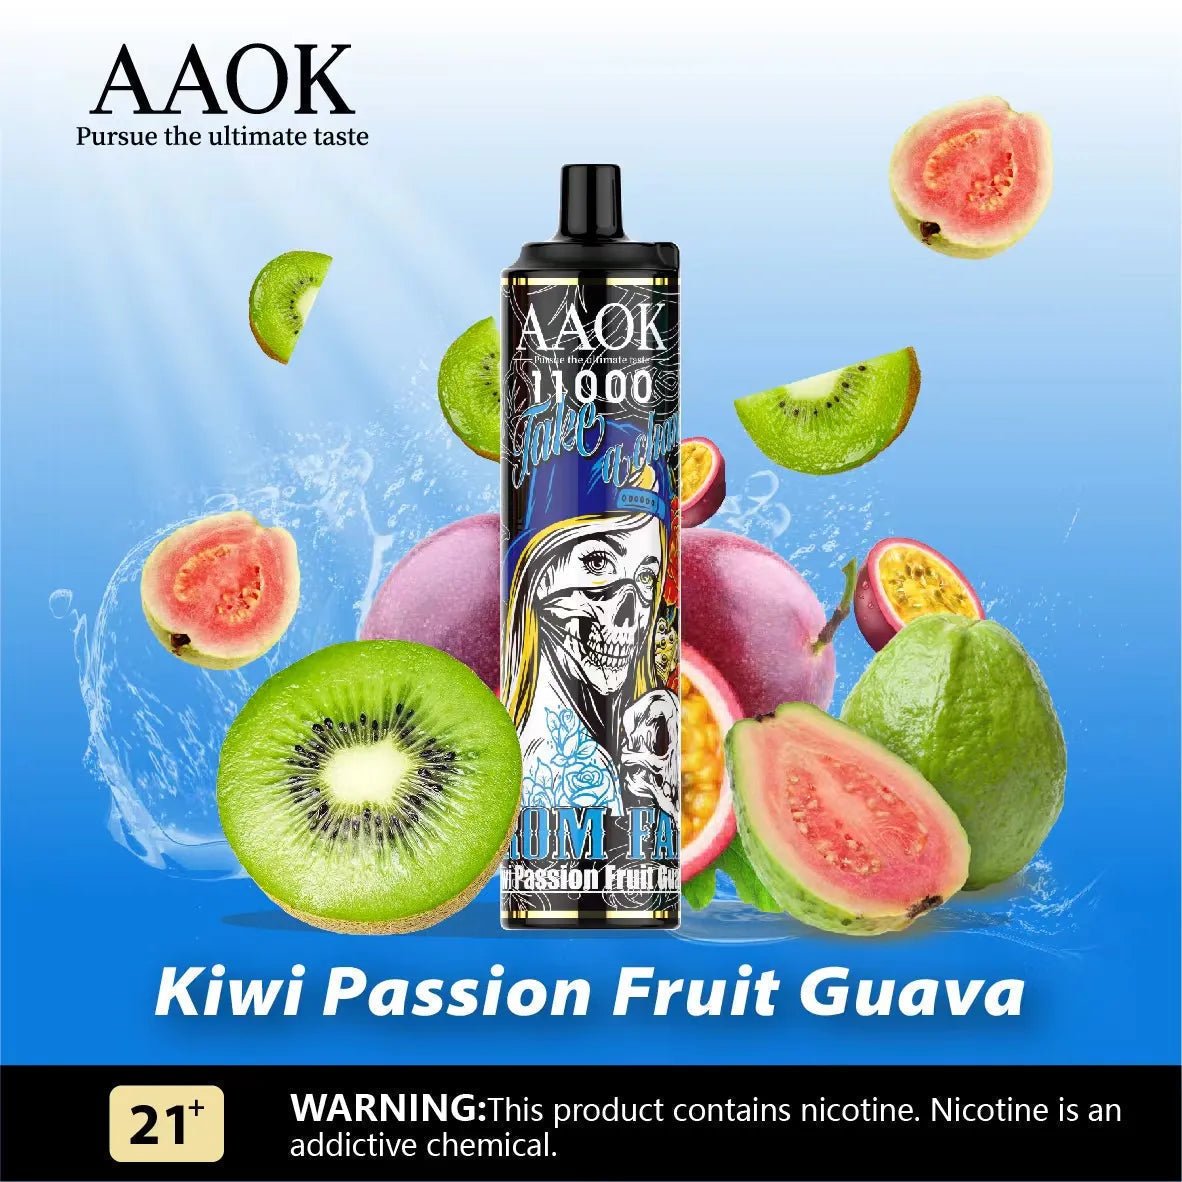 AAOK A83 11000 PUFFS - KIWI PASSION FRUIT GUAVA - HAPPYTRAIL